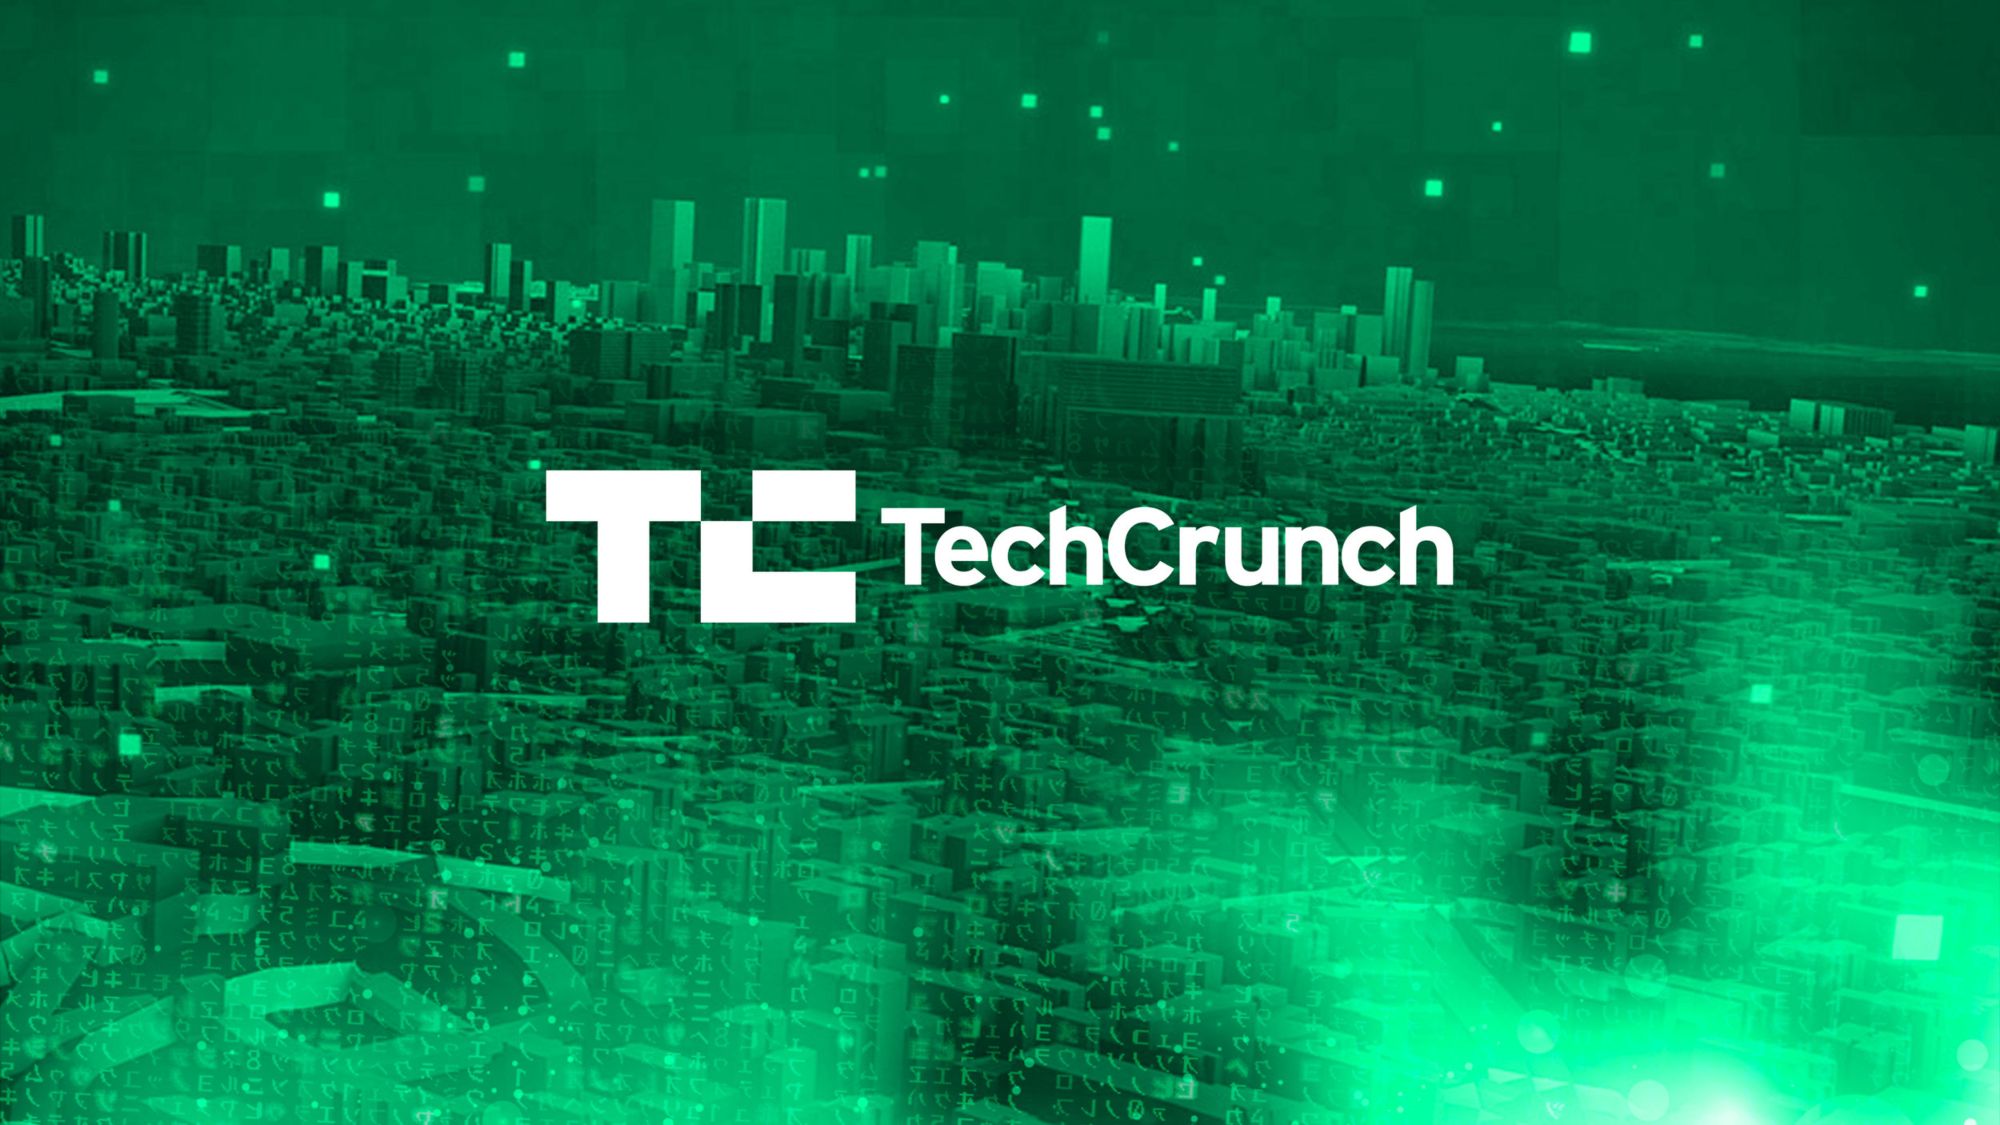 Mike Butcher of TechCrunch It Is up to the Industry to Get Its Own House in Order